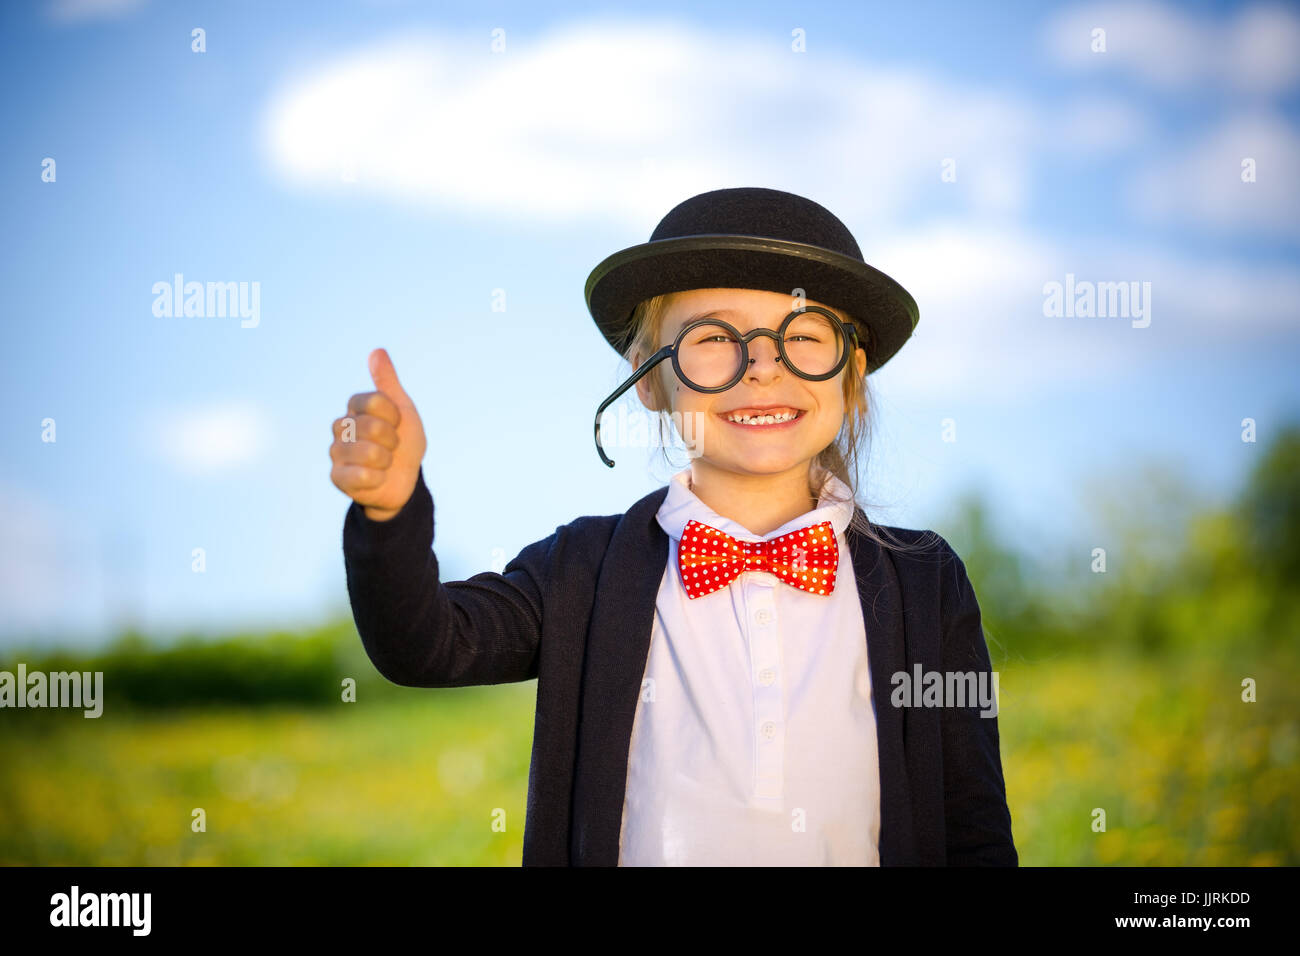 Funny little girl in bow tie and bowler hat showing thumb up. Stock Photo